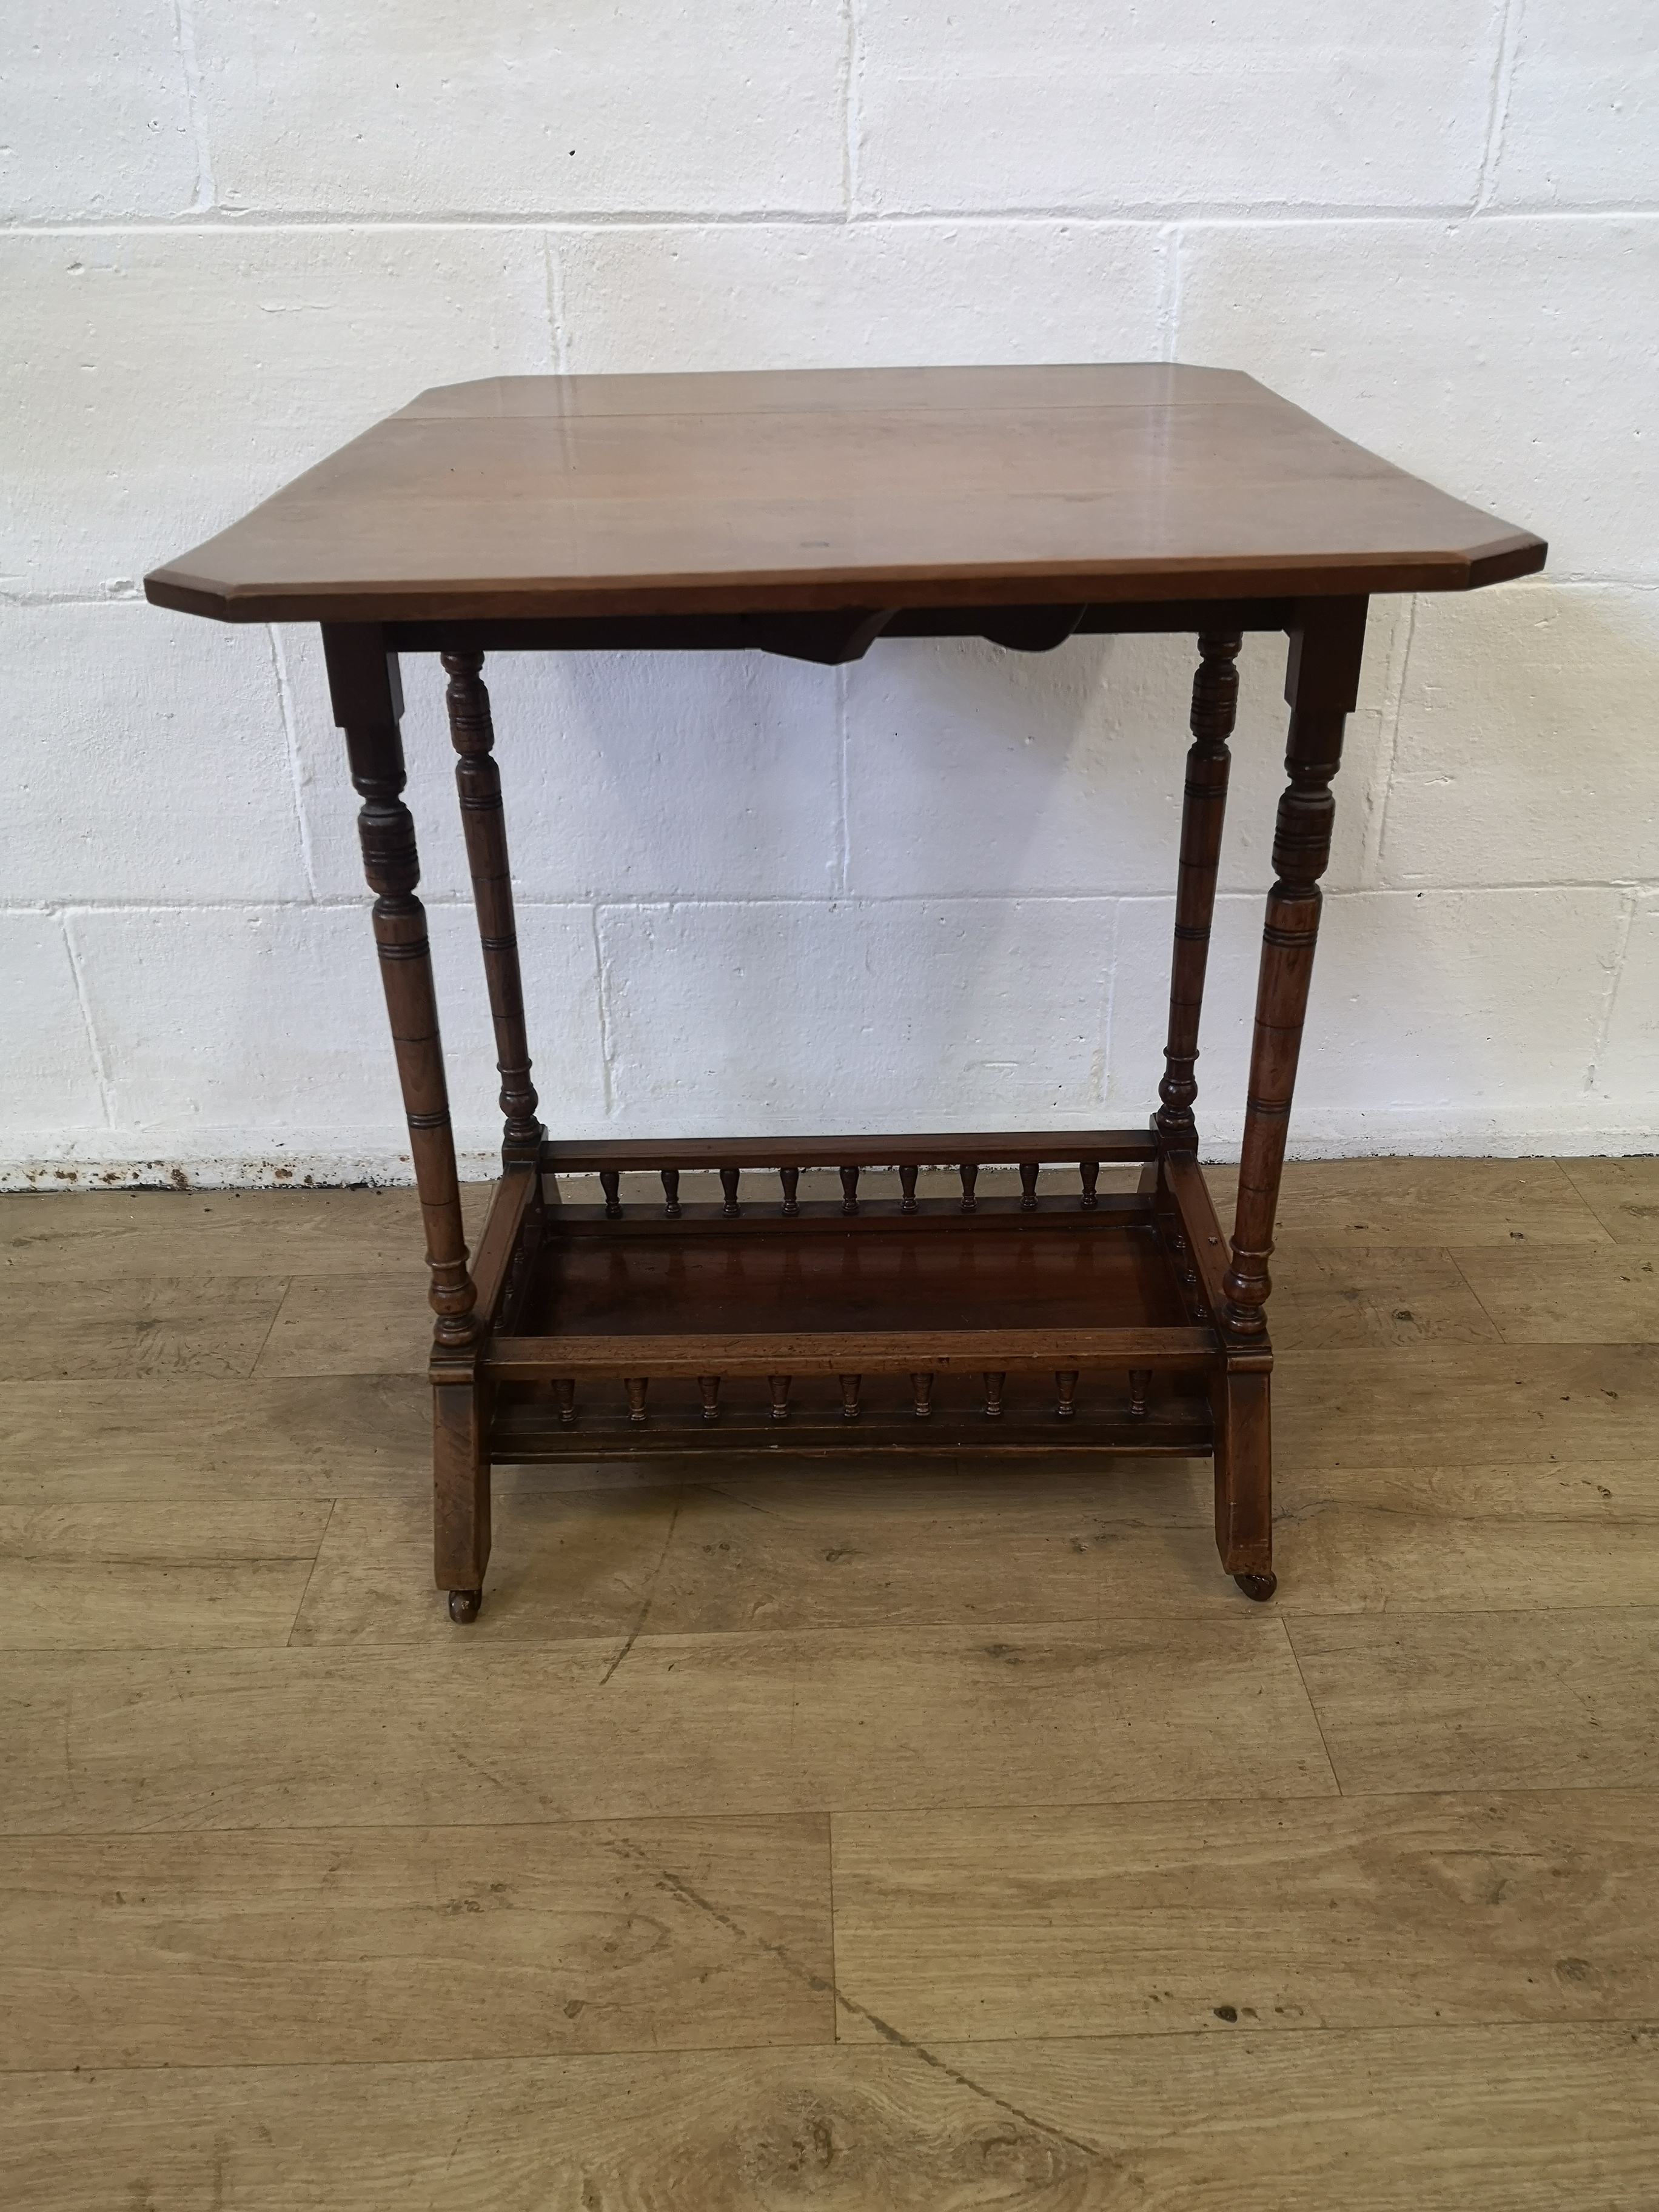 Mahogany drop leaf side table with canted corners - Image 4 of 7